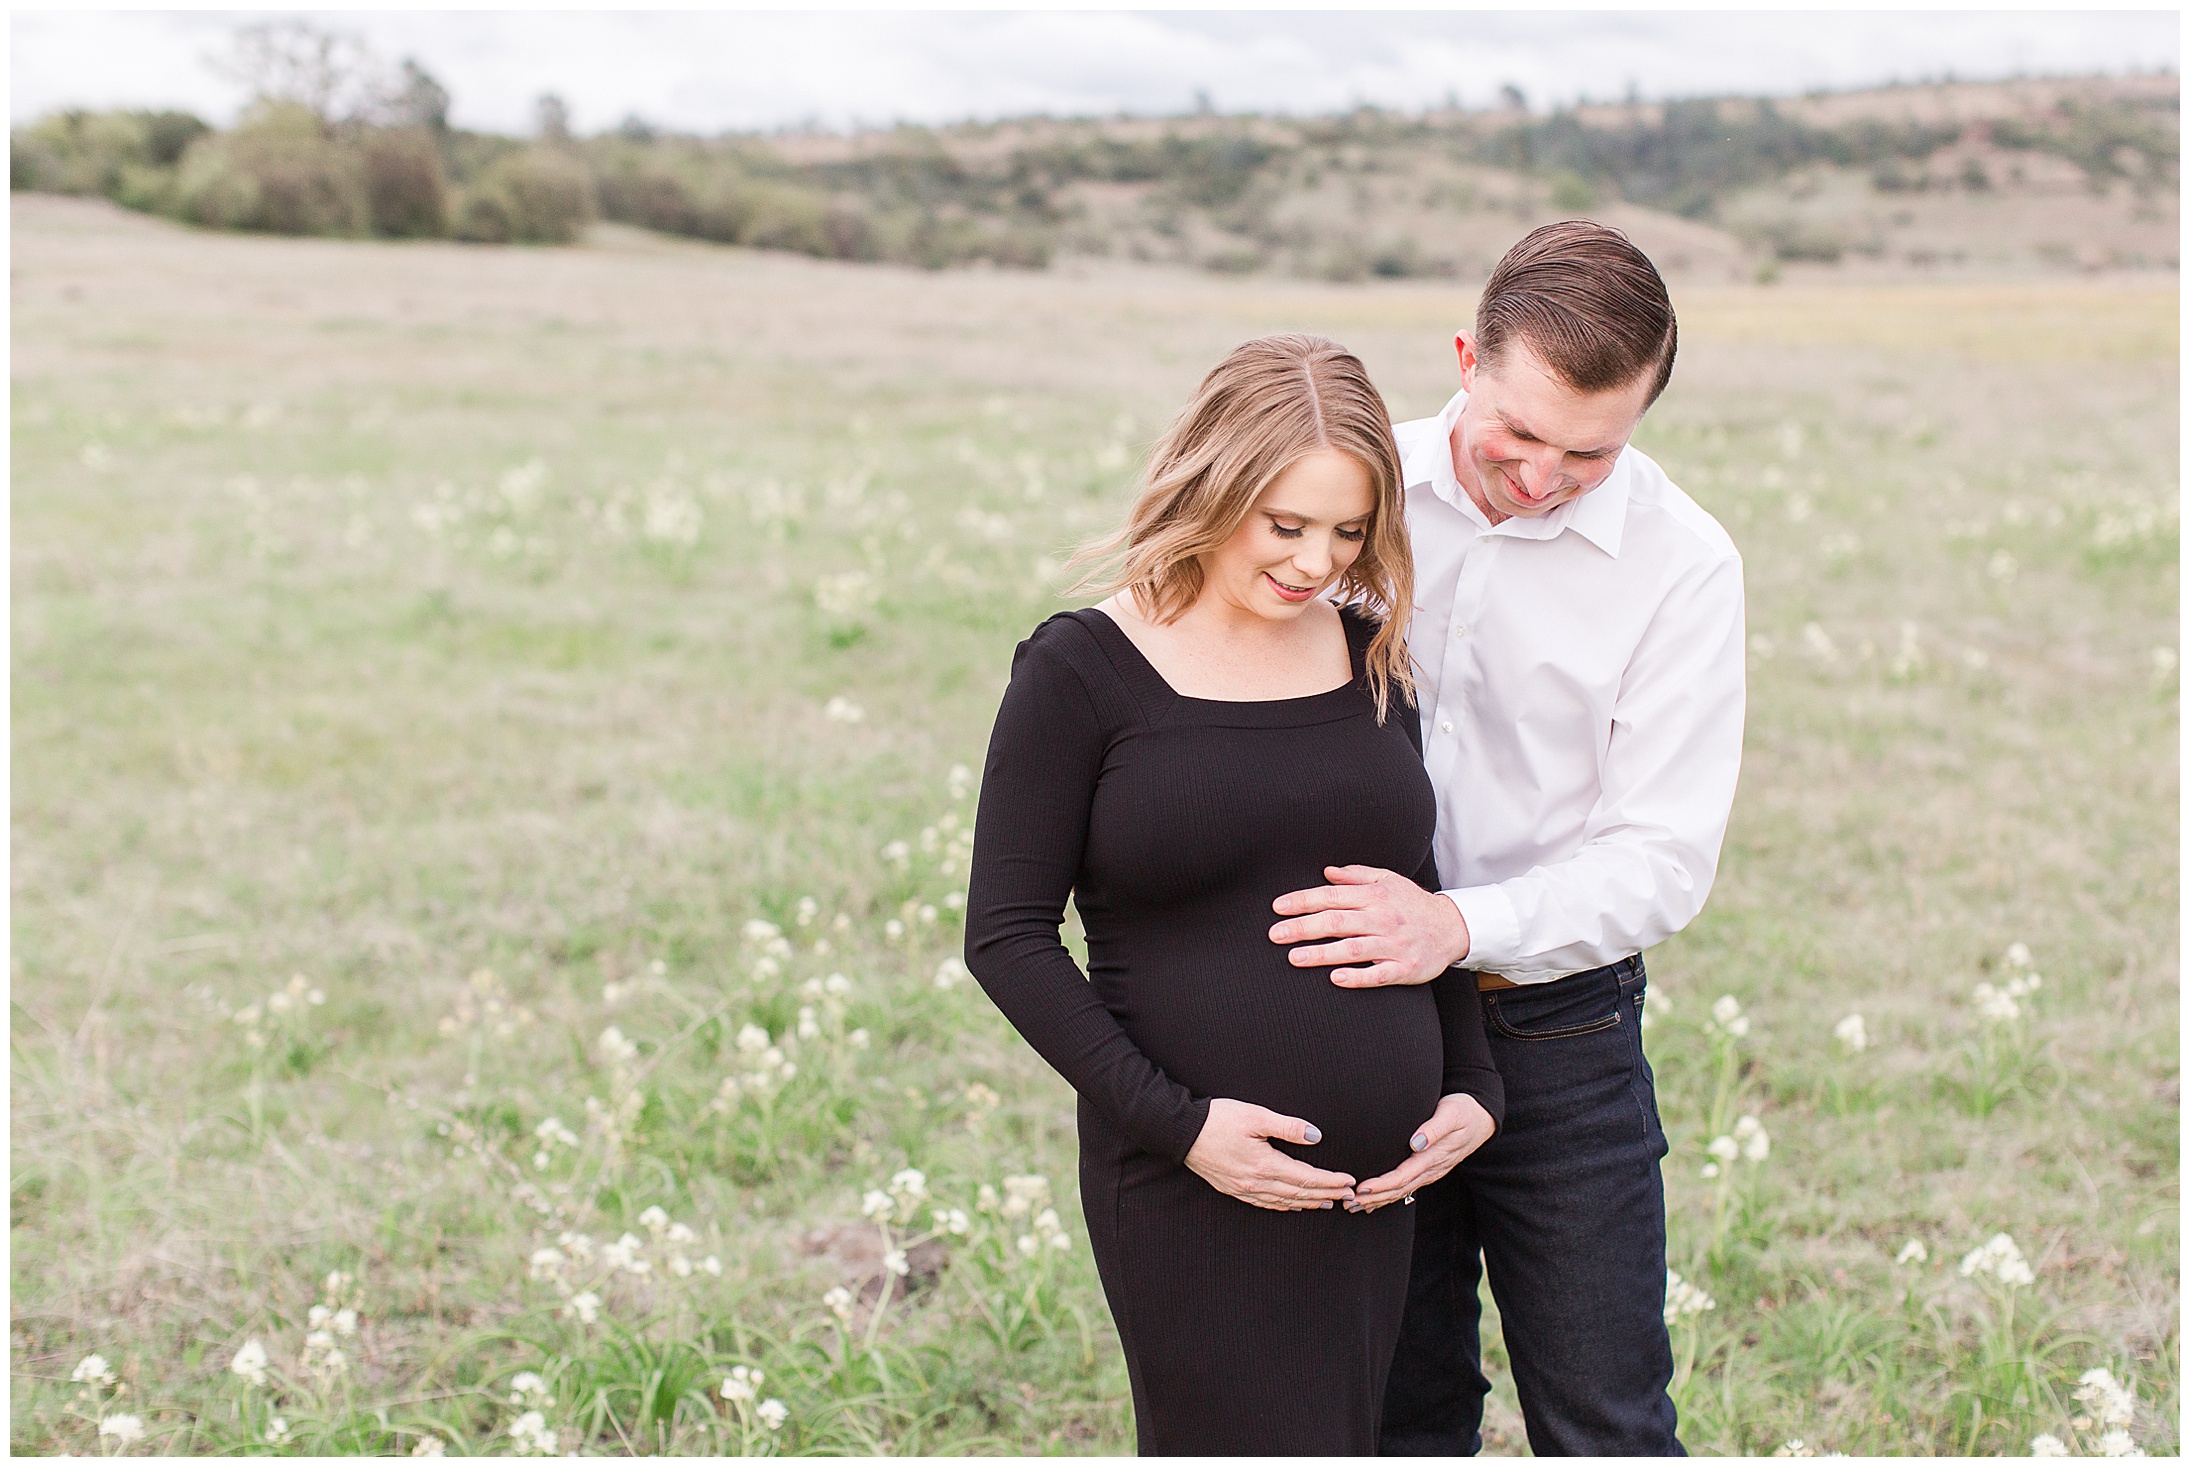 Upper Bidwell Park Maternity Session Wildflowers Spring,